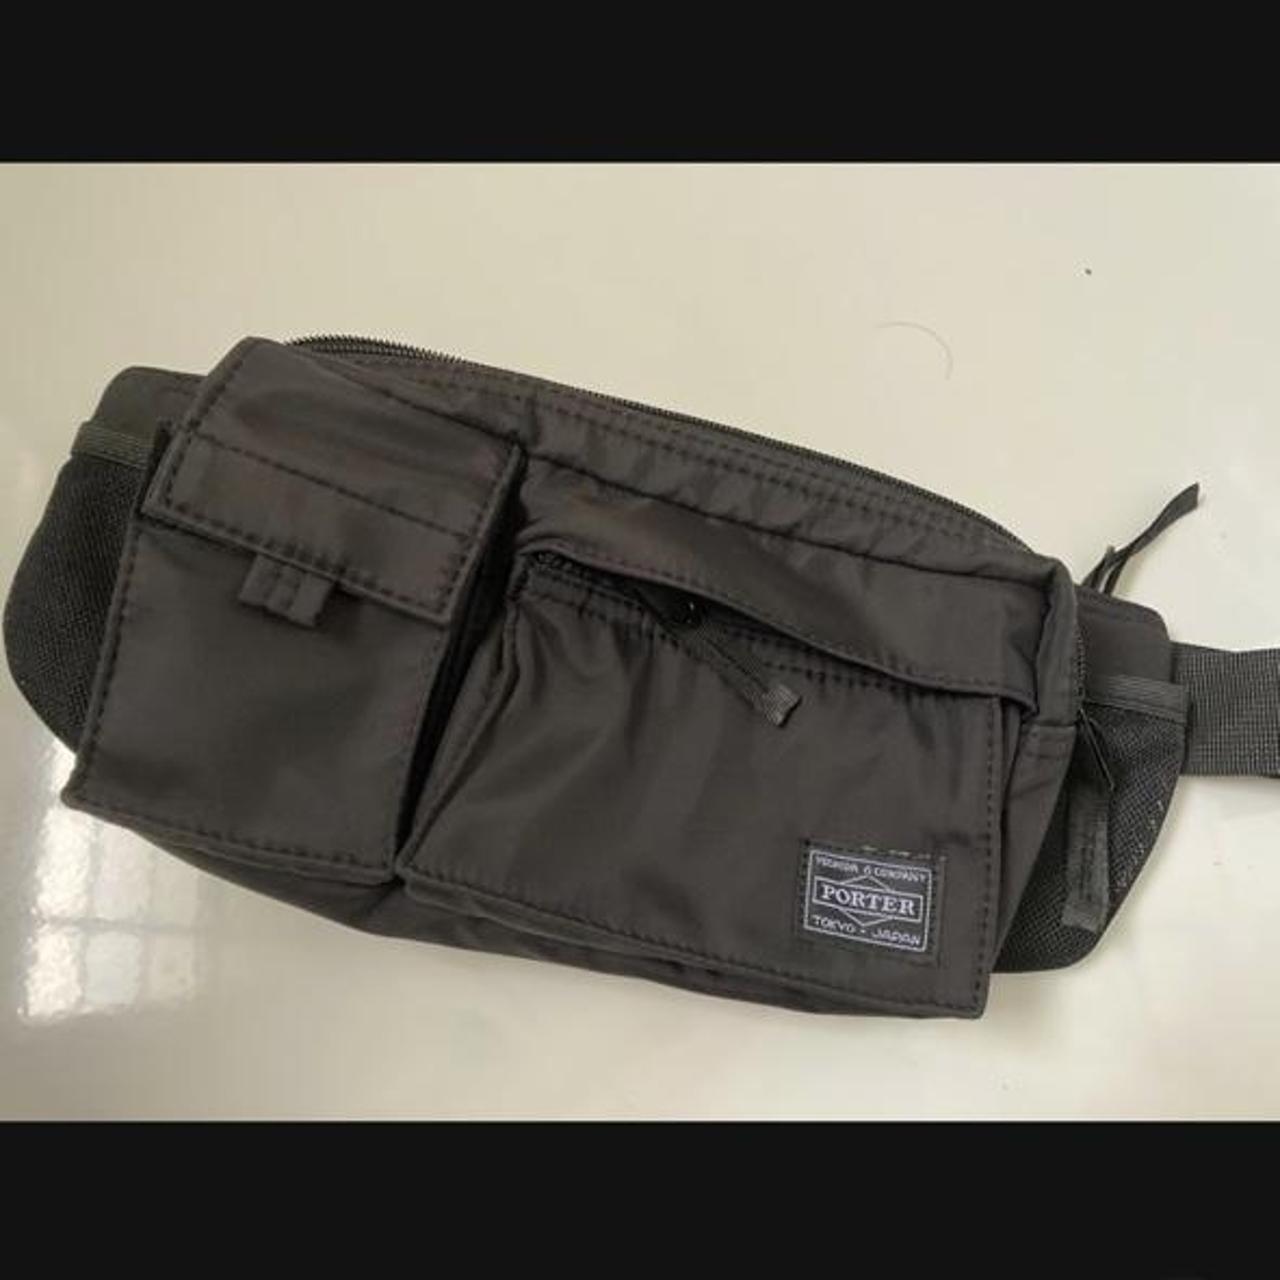 Product Image 2 - Used Porter bag. Can be